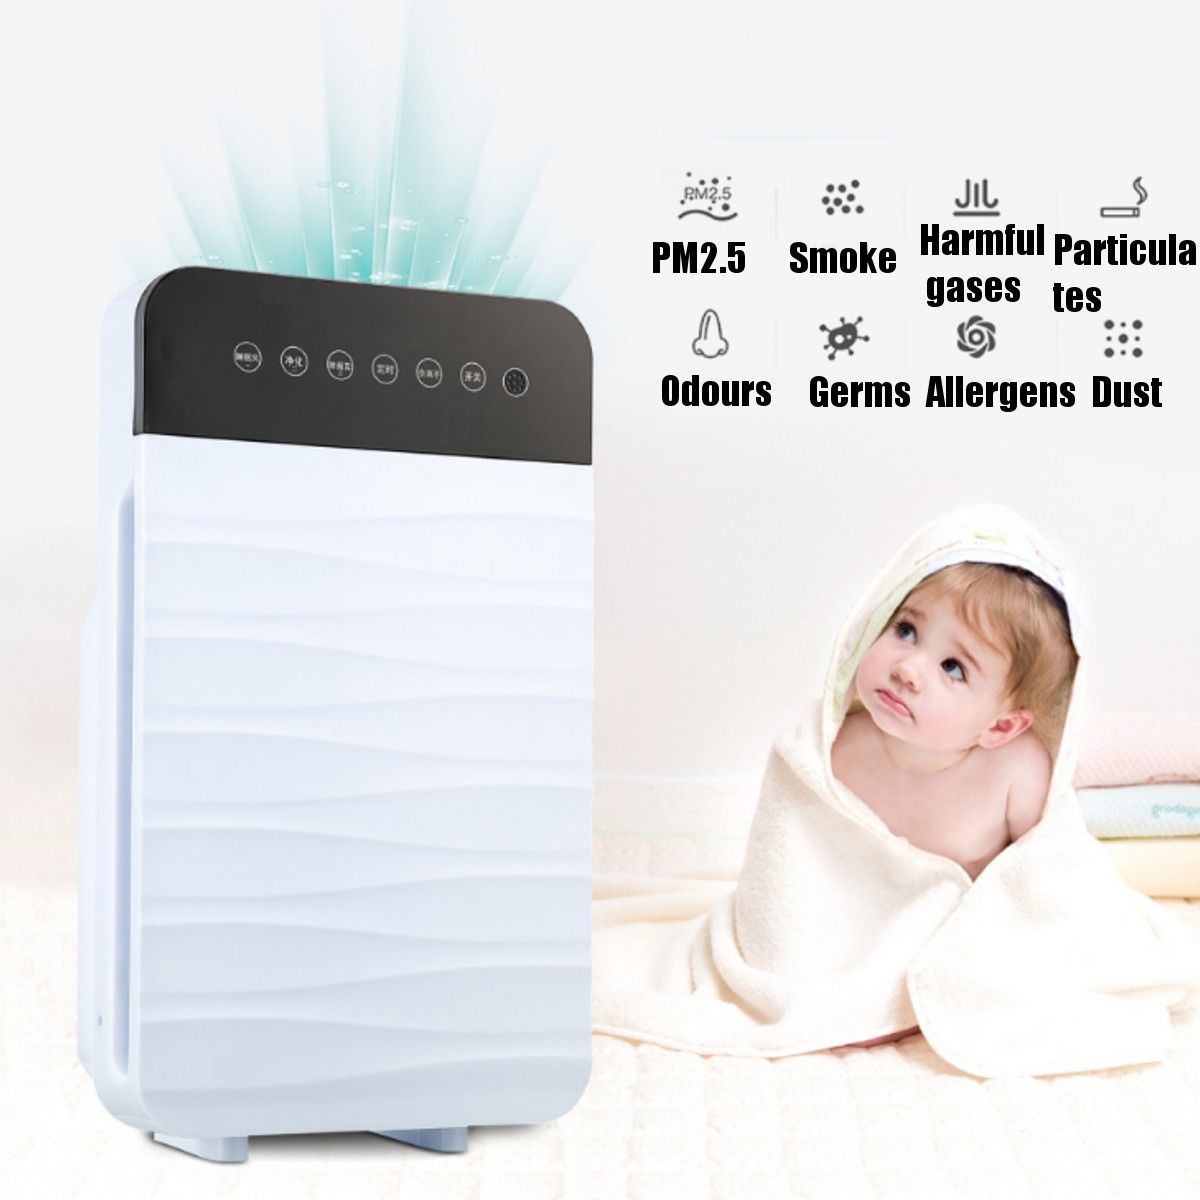 Air-Purifier-300msup3H-Composite-Filter-Home-PM25-Odor-Smoke-Dust-Cleaner-Remote-Controller-1648126